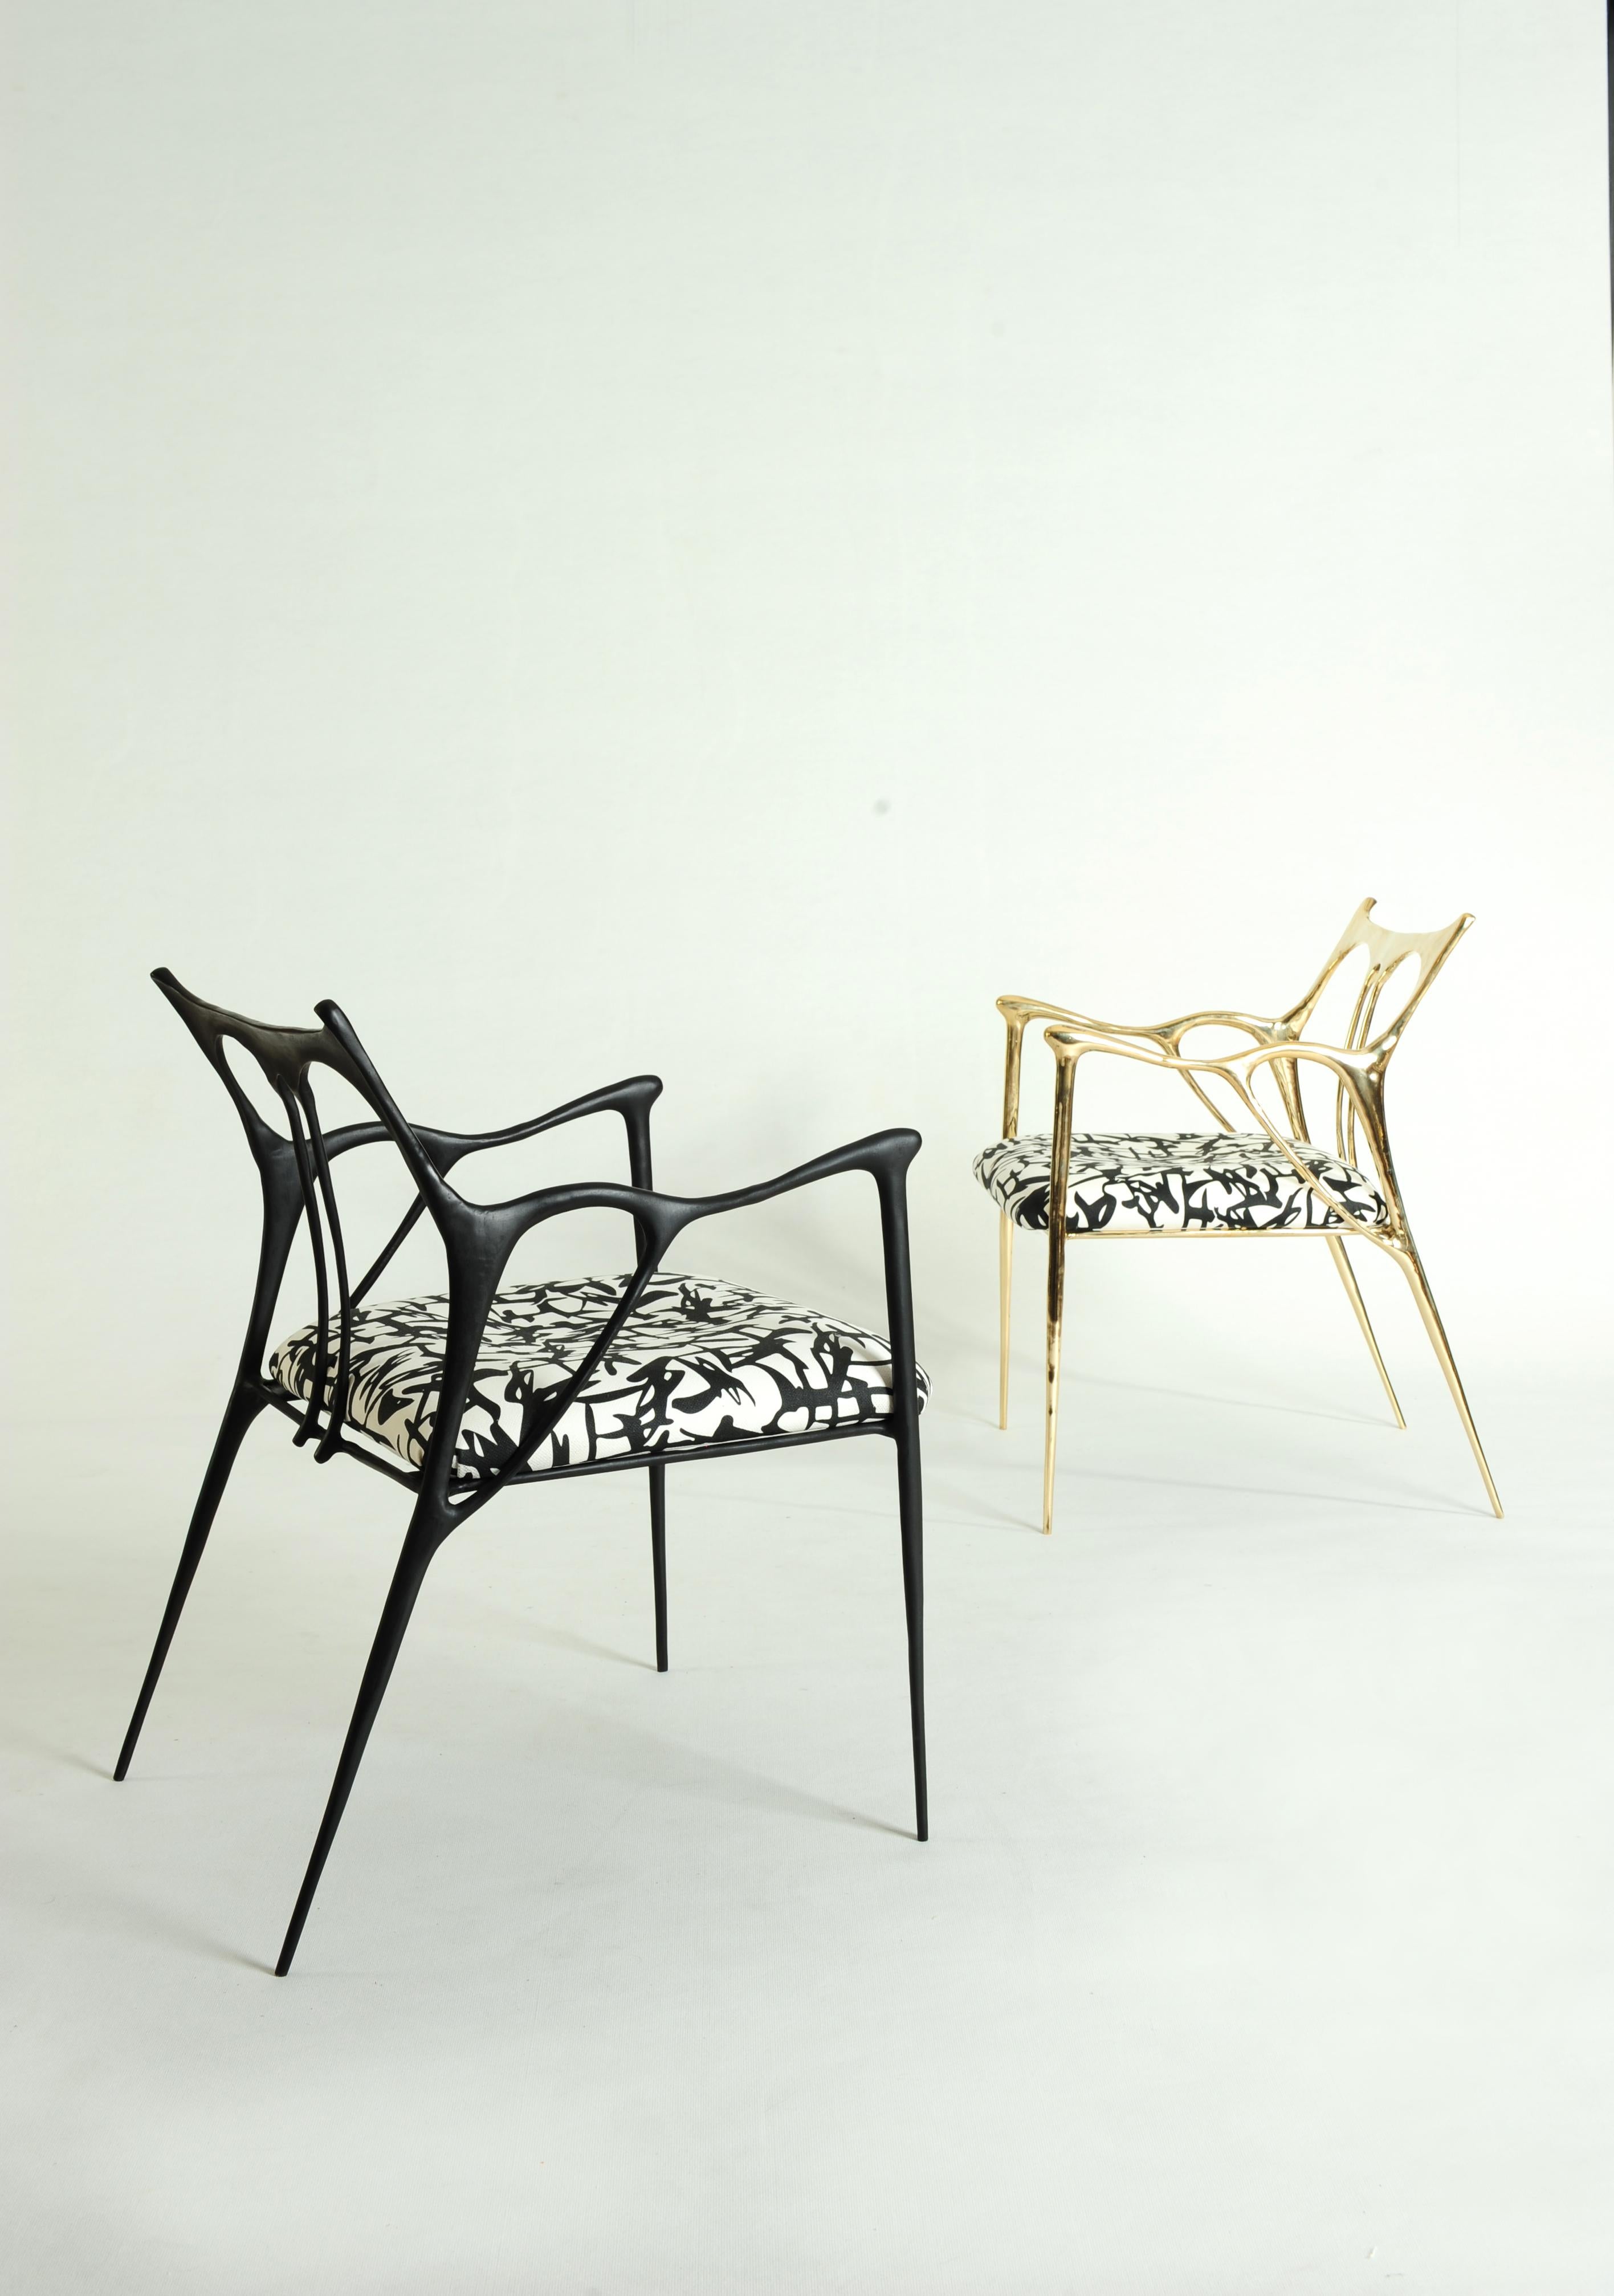 Pair of sculpted brass chairs, Misaya
Dimensions: W 54 x L 58 x H 79 cm (seating: 42cm)
Hand-sculpted chairs.
 
Misaya emulates Chinese ink paintings through the process of lost-wax casting.

Each piece in the Ink Collection, which consists of